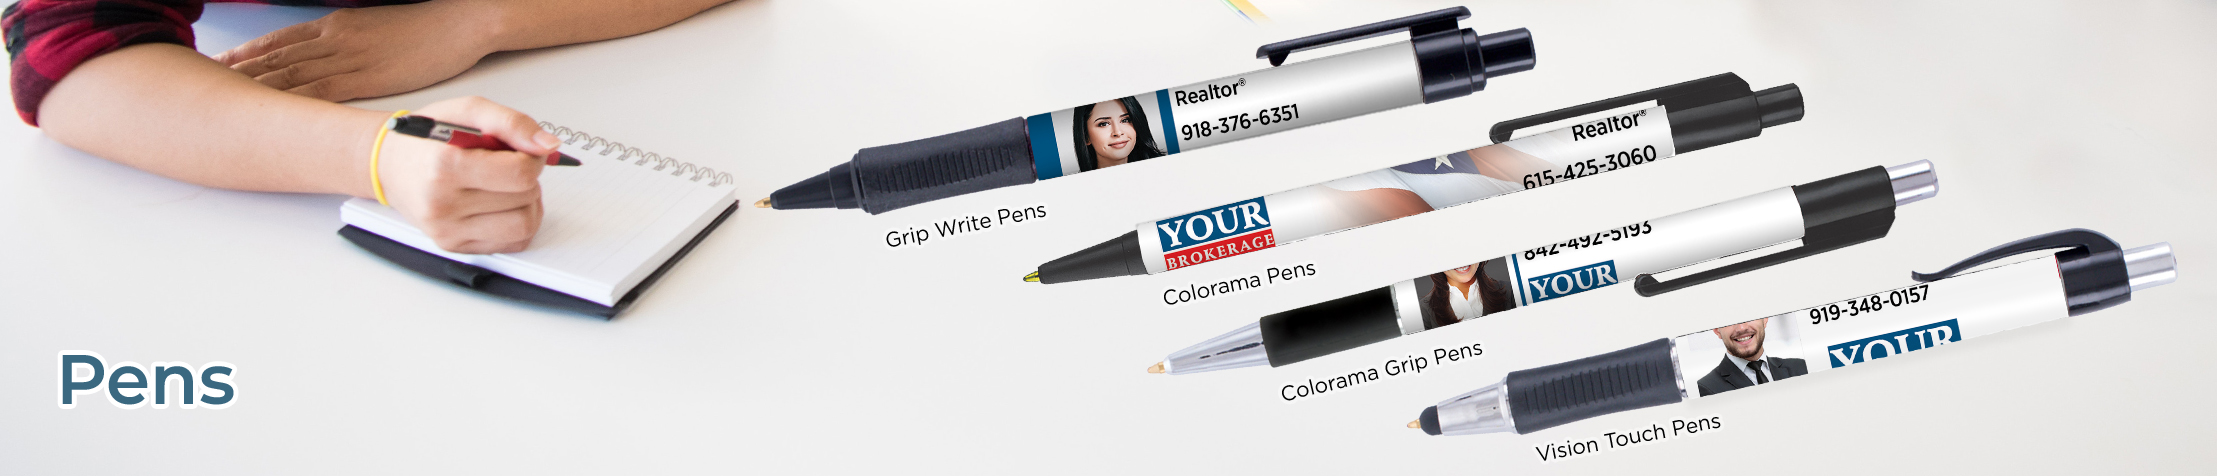 Counselor Realty Real Estate Personalized Pens - Counselor Realty promotional products: Grip Write Pens, Colorama Pens, Vision Touch Pens, and Colorama Grip Pens | BestPrintBuy.com